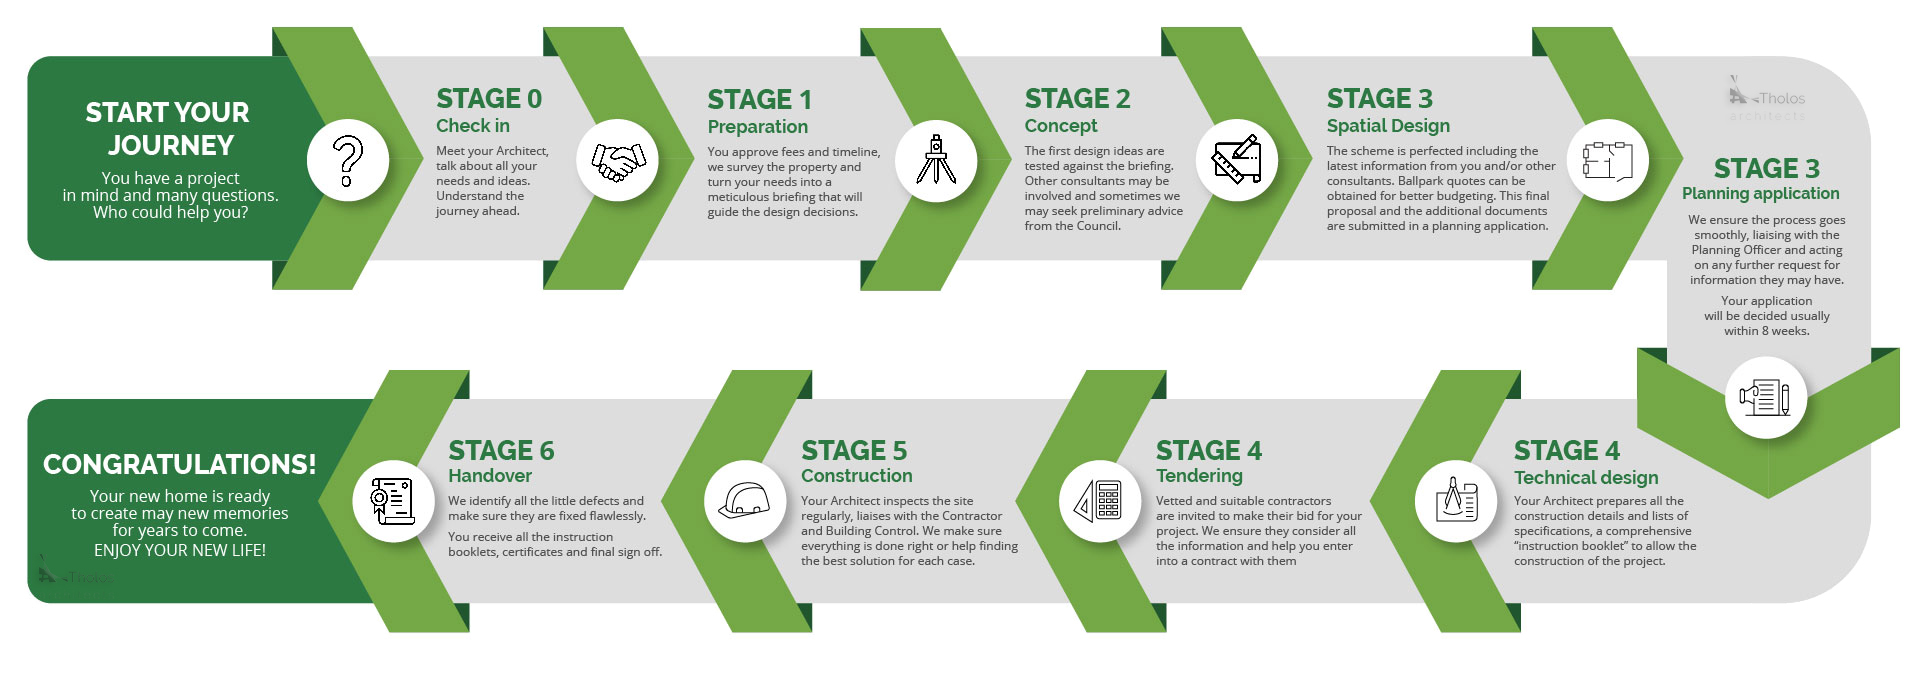 a roadmap showing what happens throughout stages 0-6 of an architecture project. Meet your Architect, define your needs, approve the project ideas, prepare for planning, receive a full construction package, get builders to quote, start and complete construction, make good the final details.